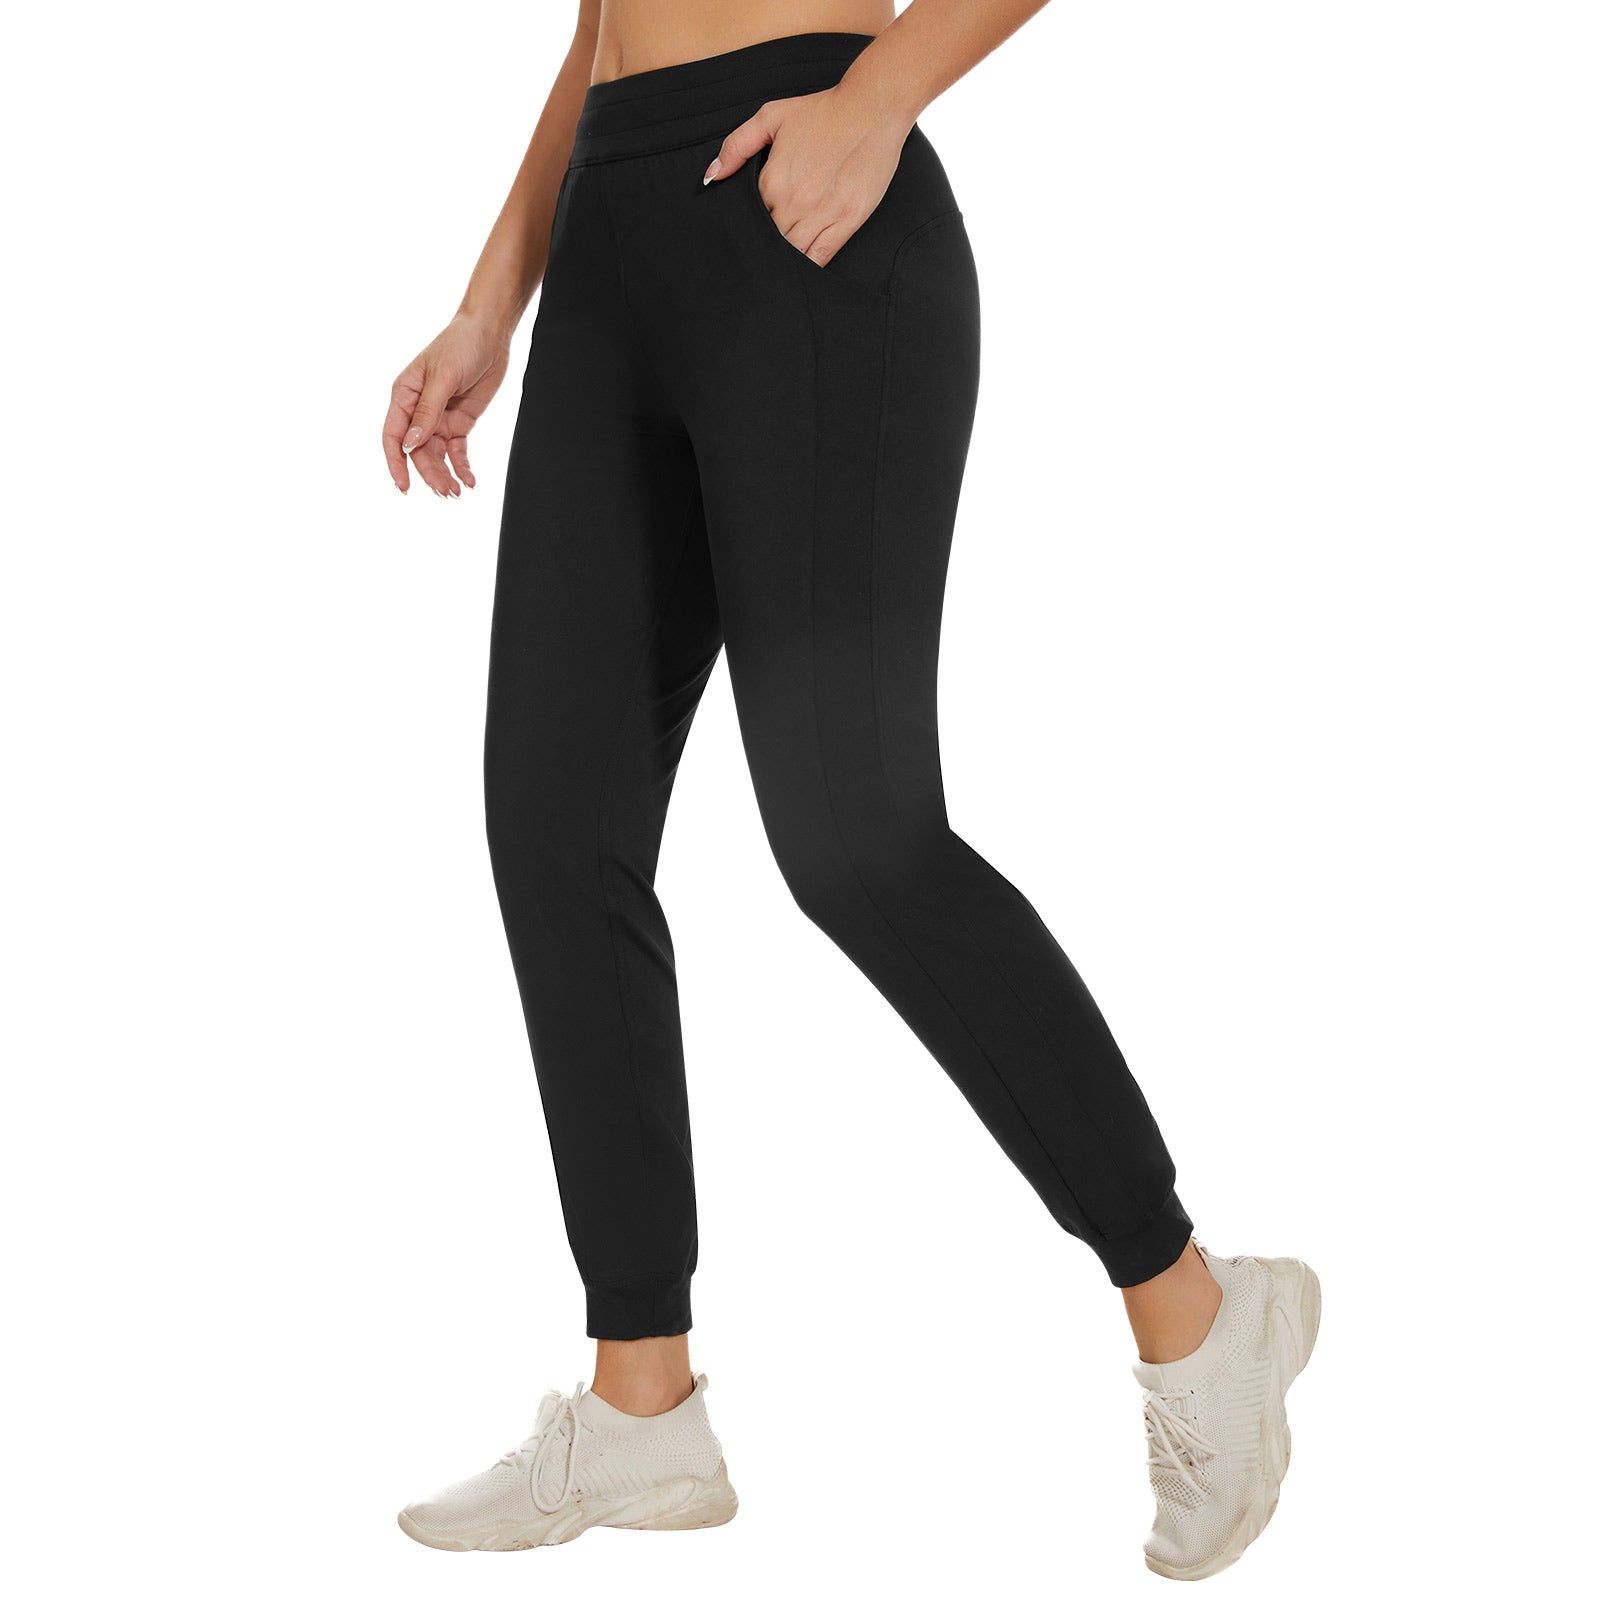 Fleece Lined Leggings with Pockets Womens